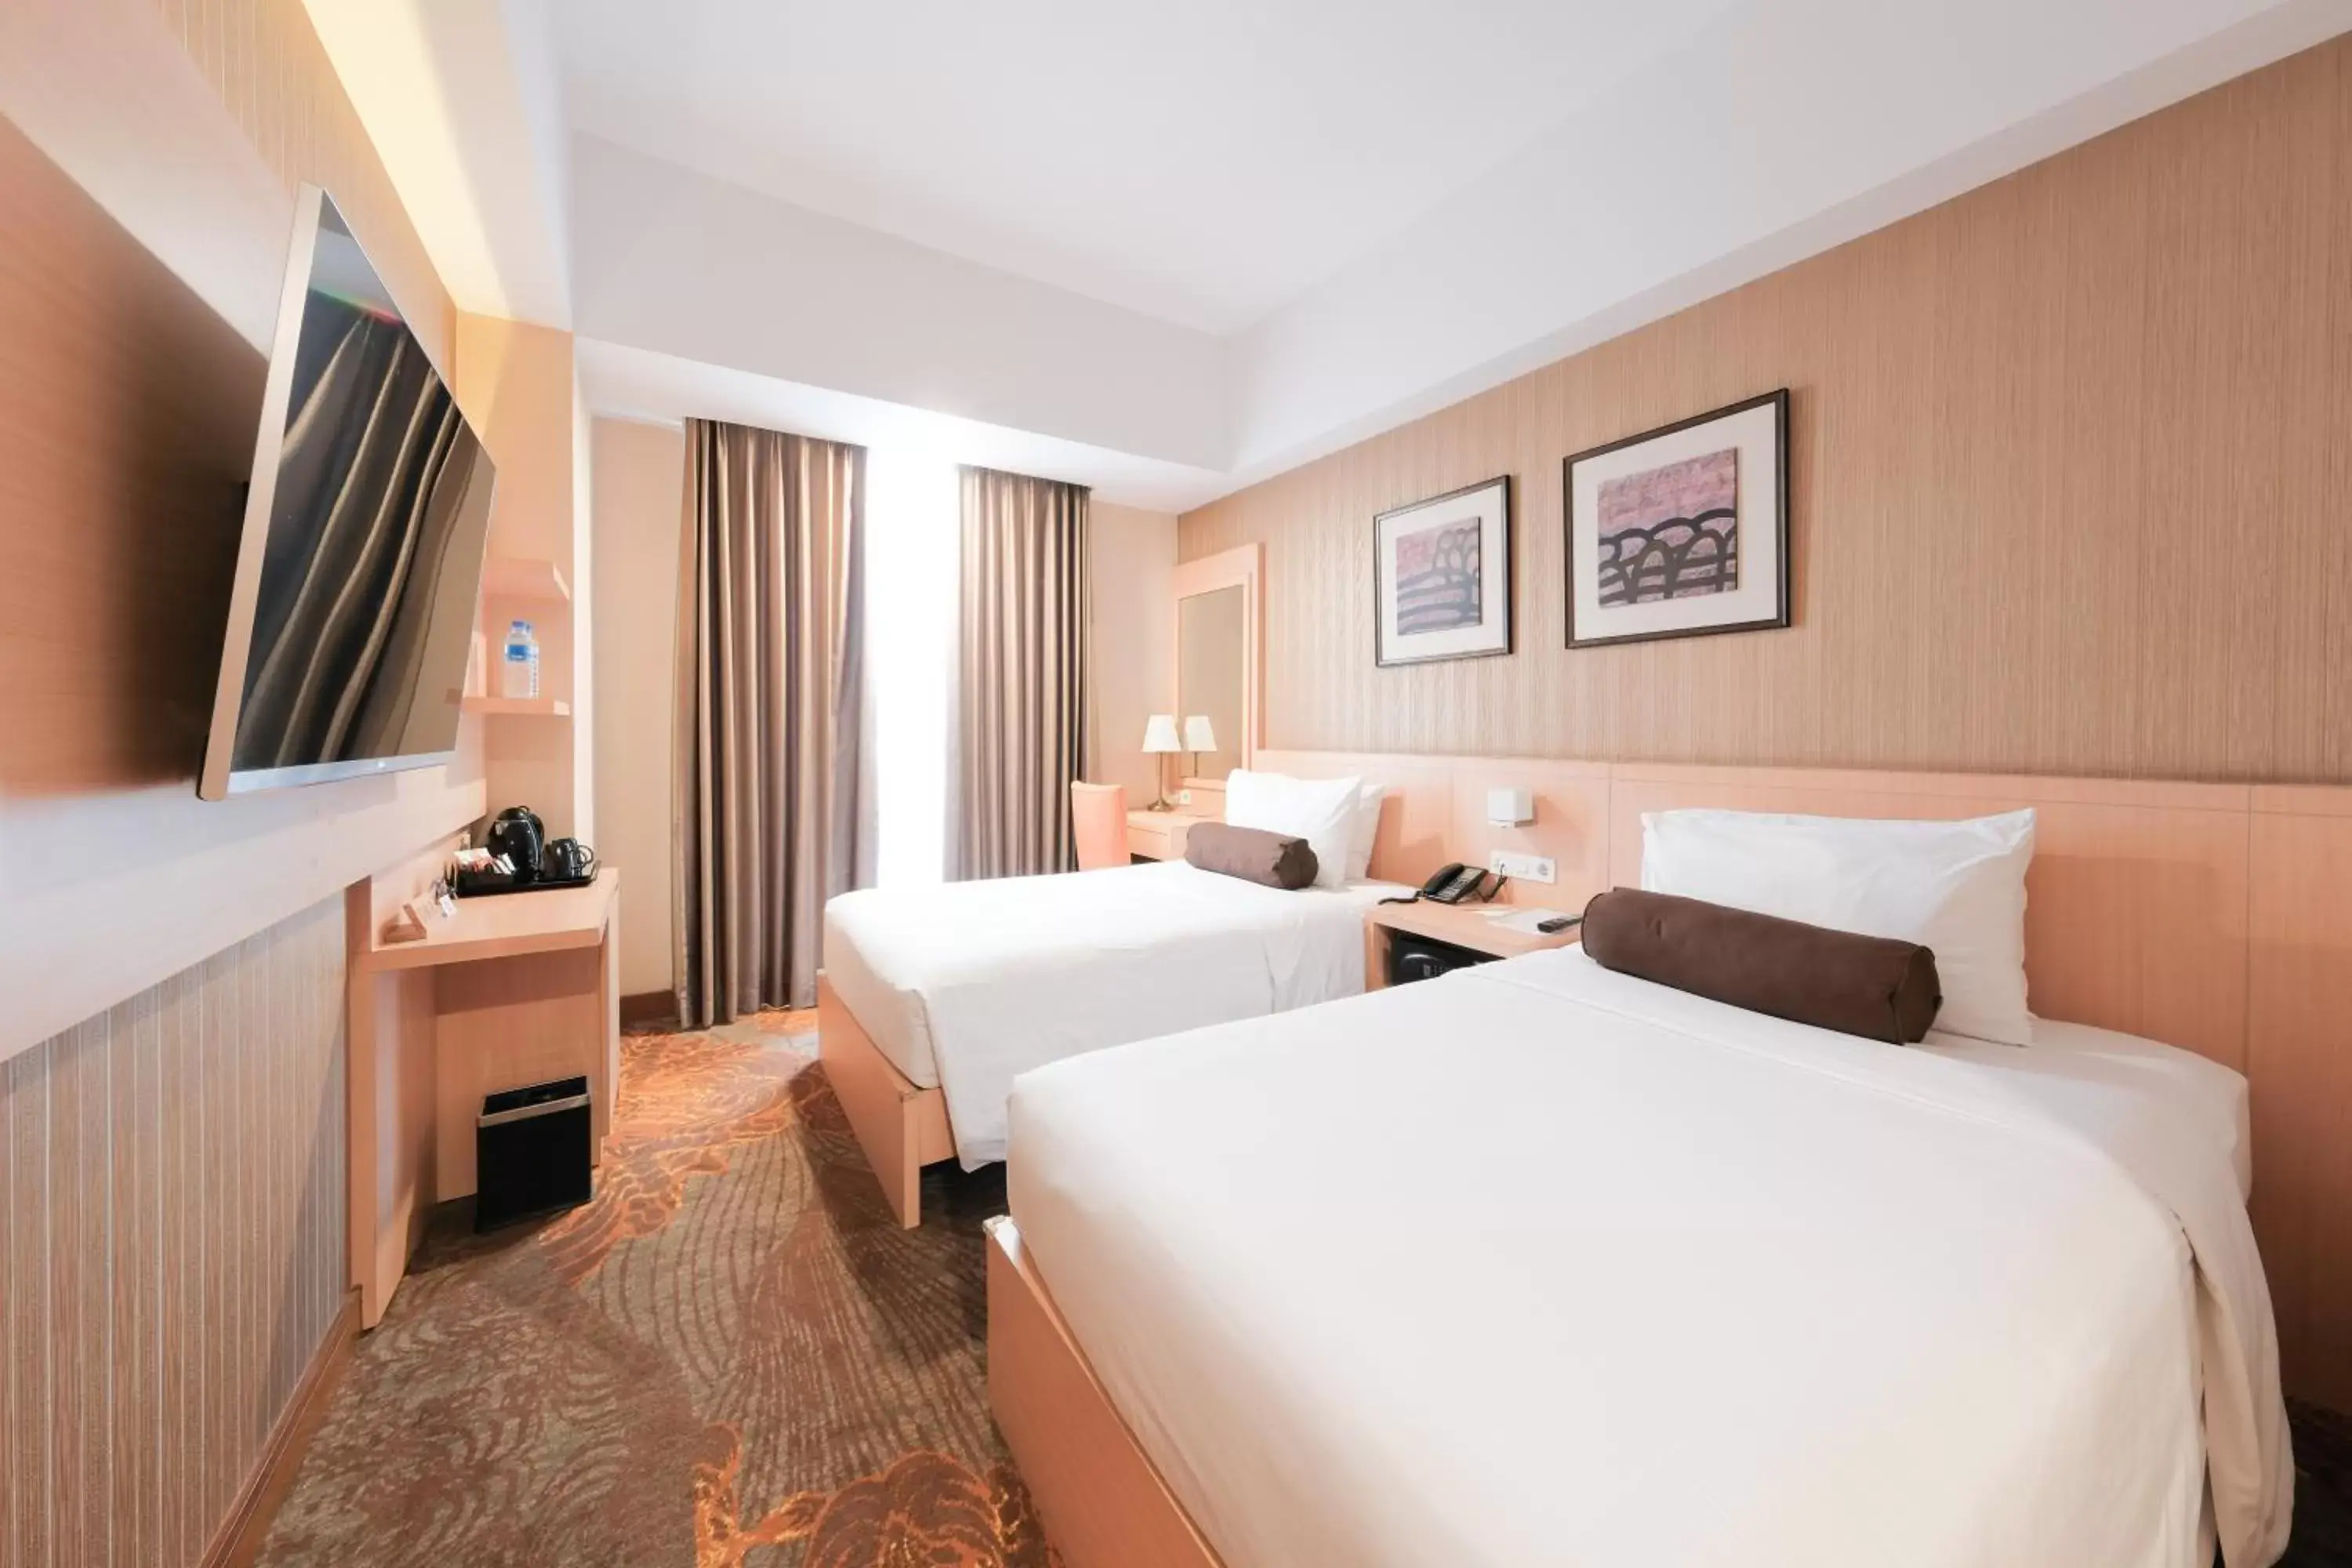 Bed in Hotel Chanti Managed by TENTREM Hotel Management Indonesia